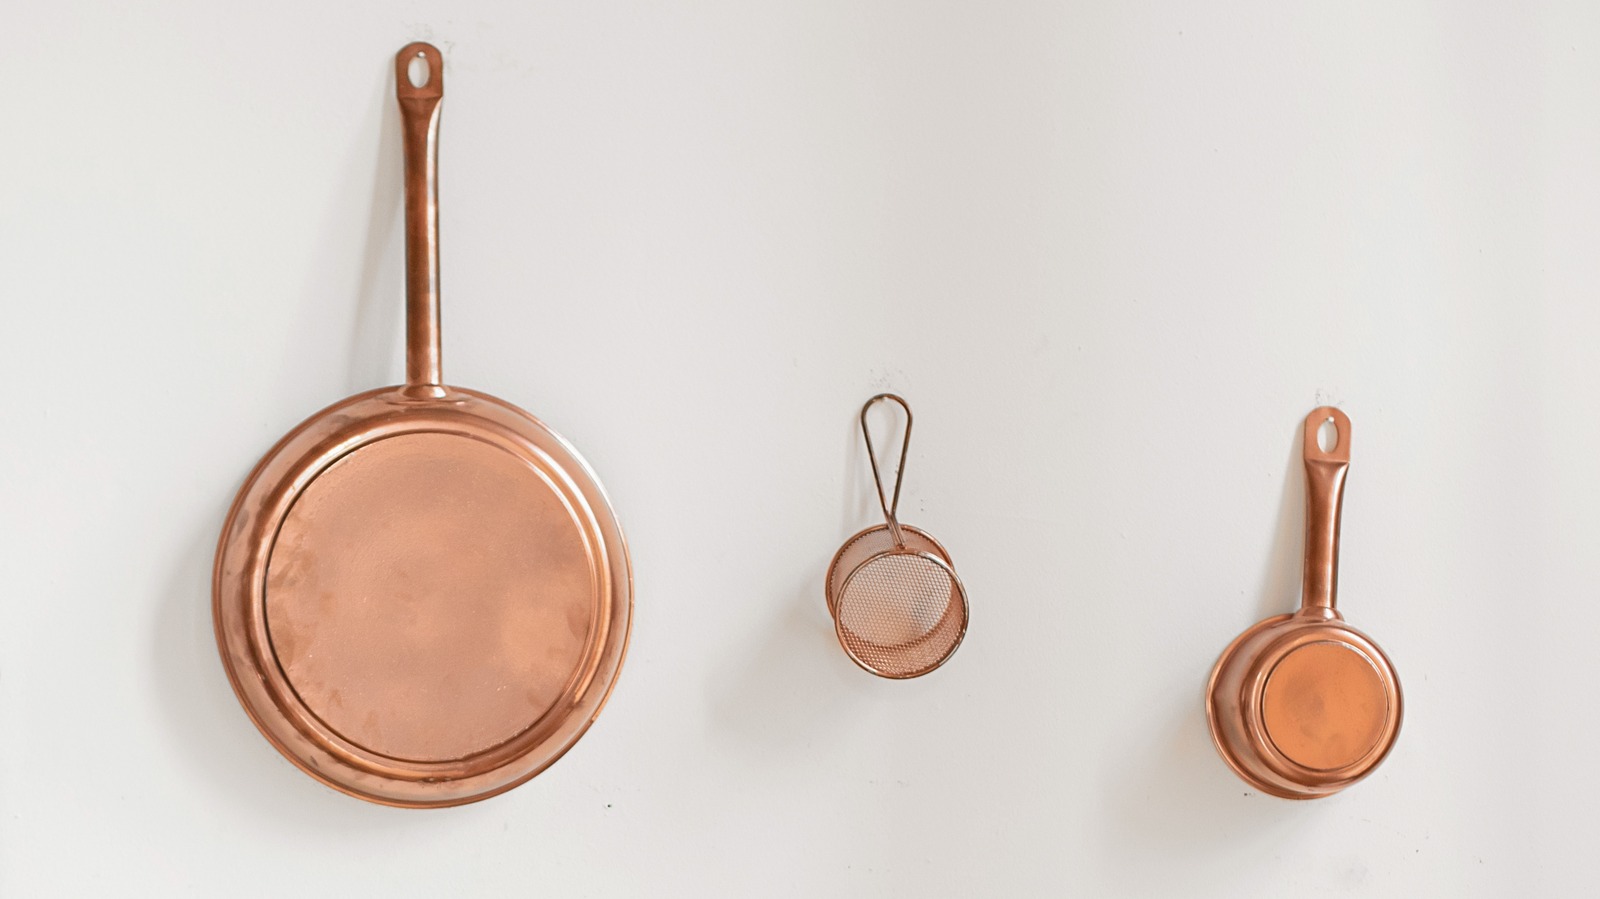 5 Clever Ways To Organize Your Pots And Pans With Limited Cabinet Space